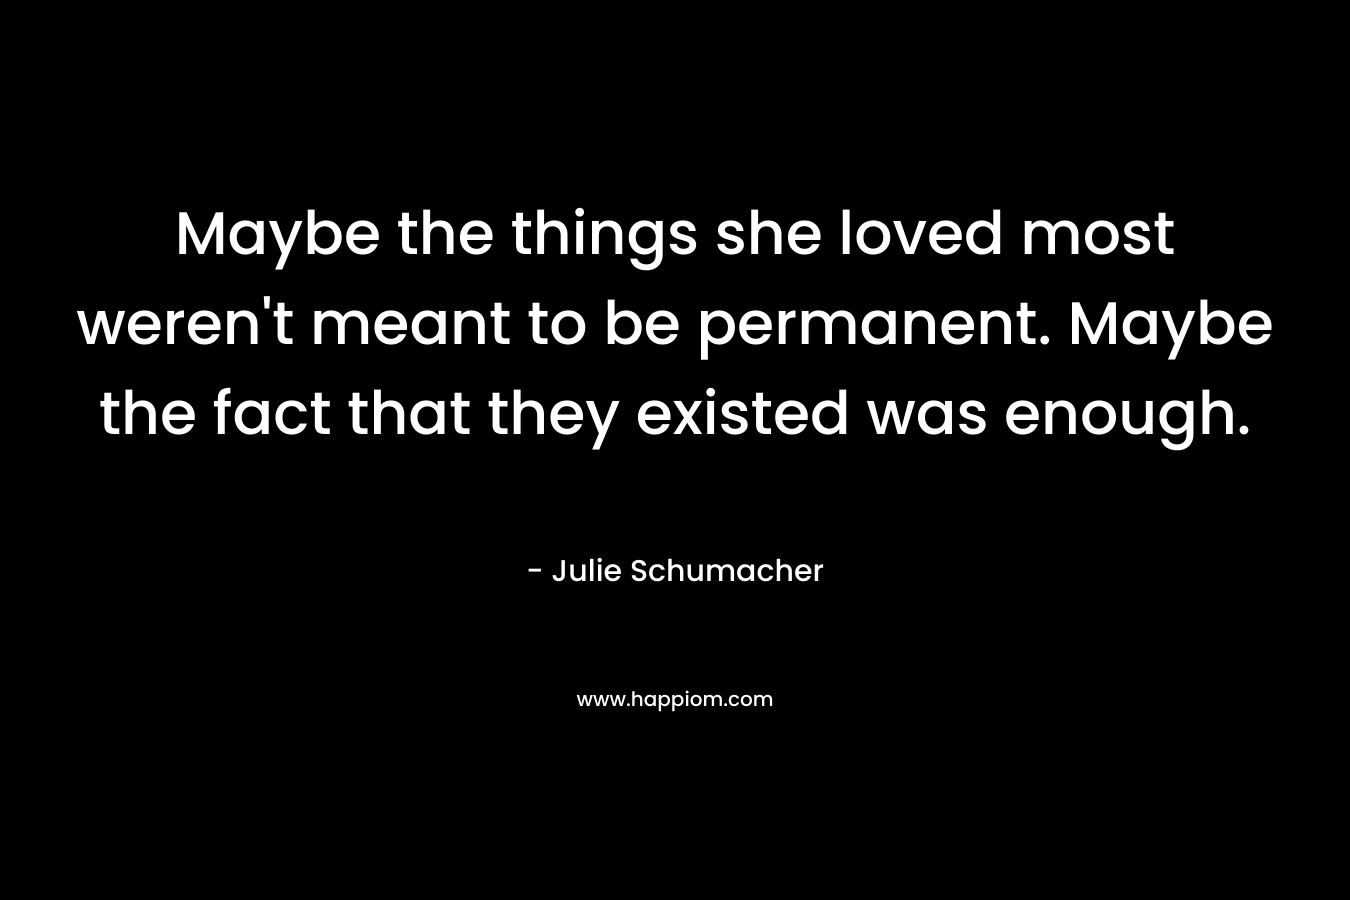 Maybe the things she loved most weren’t meant to be permanent. Maybe the fact that they existed was enough. – Julie Schumacher